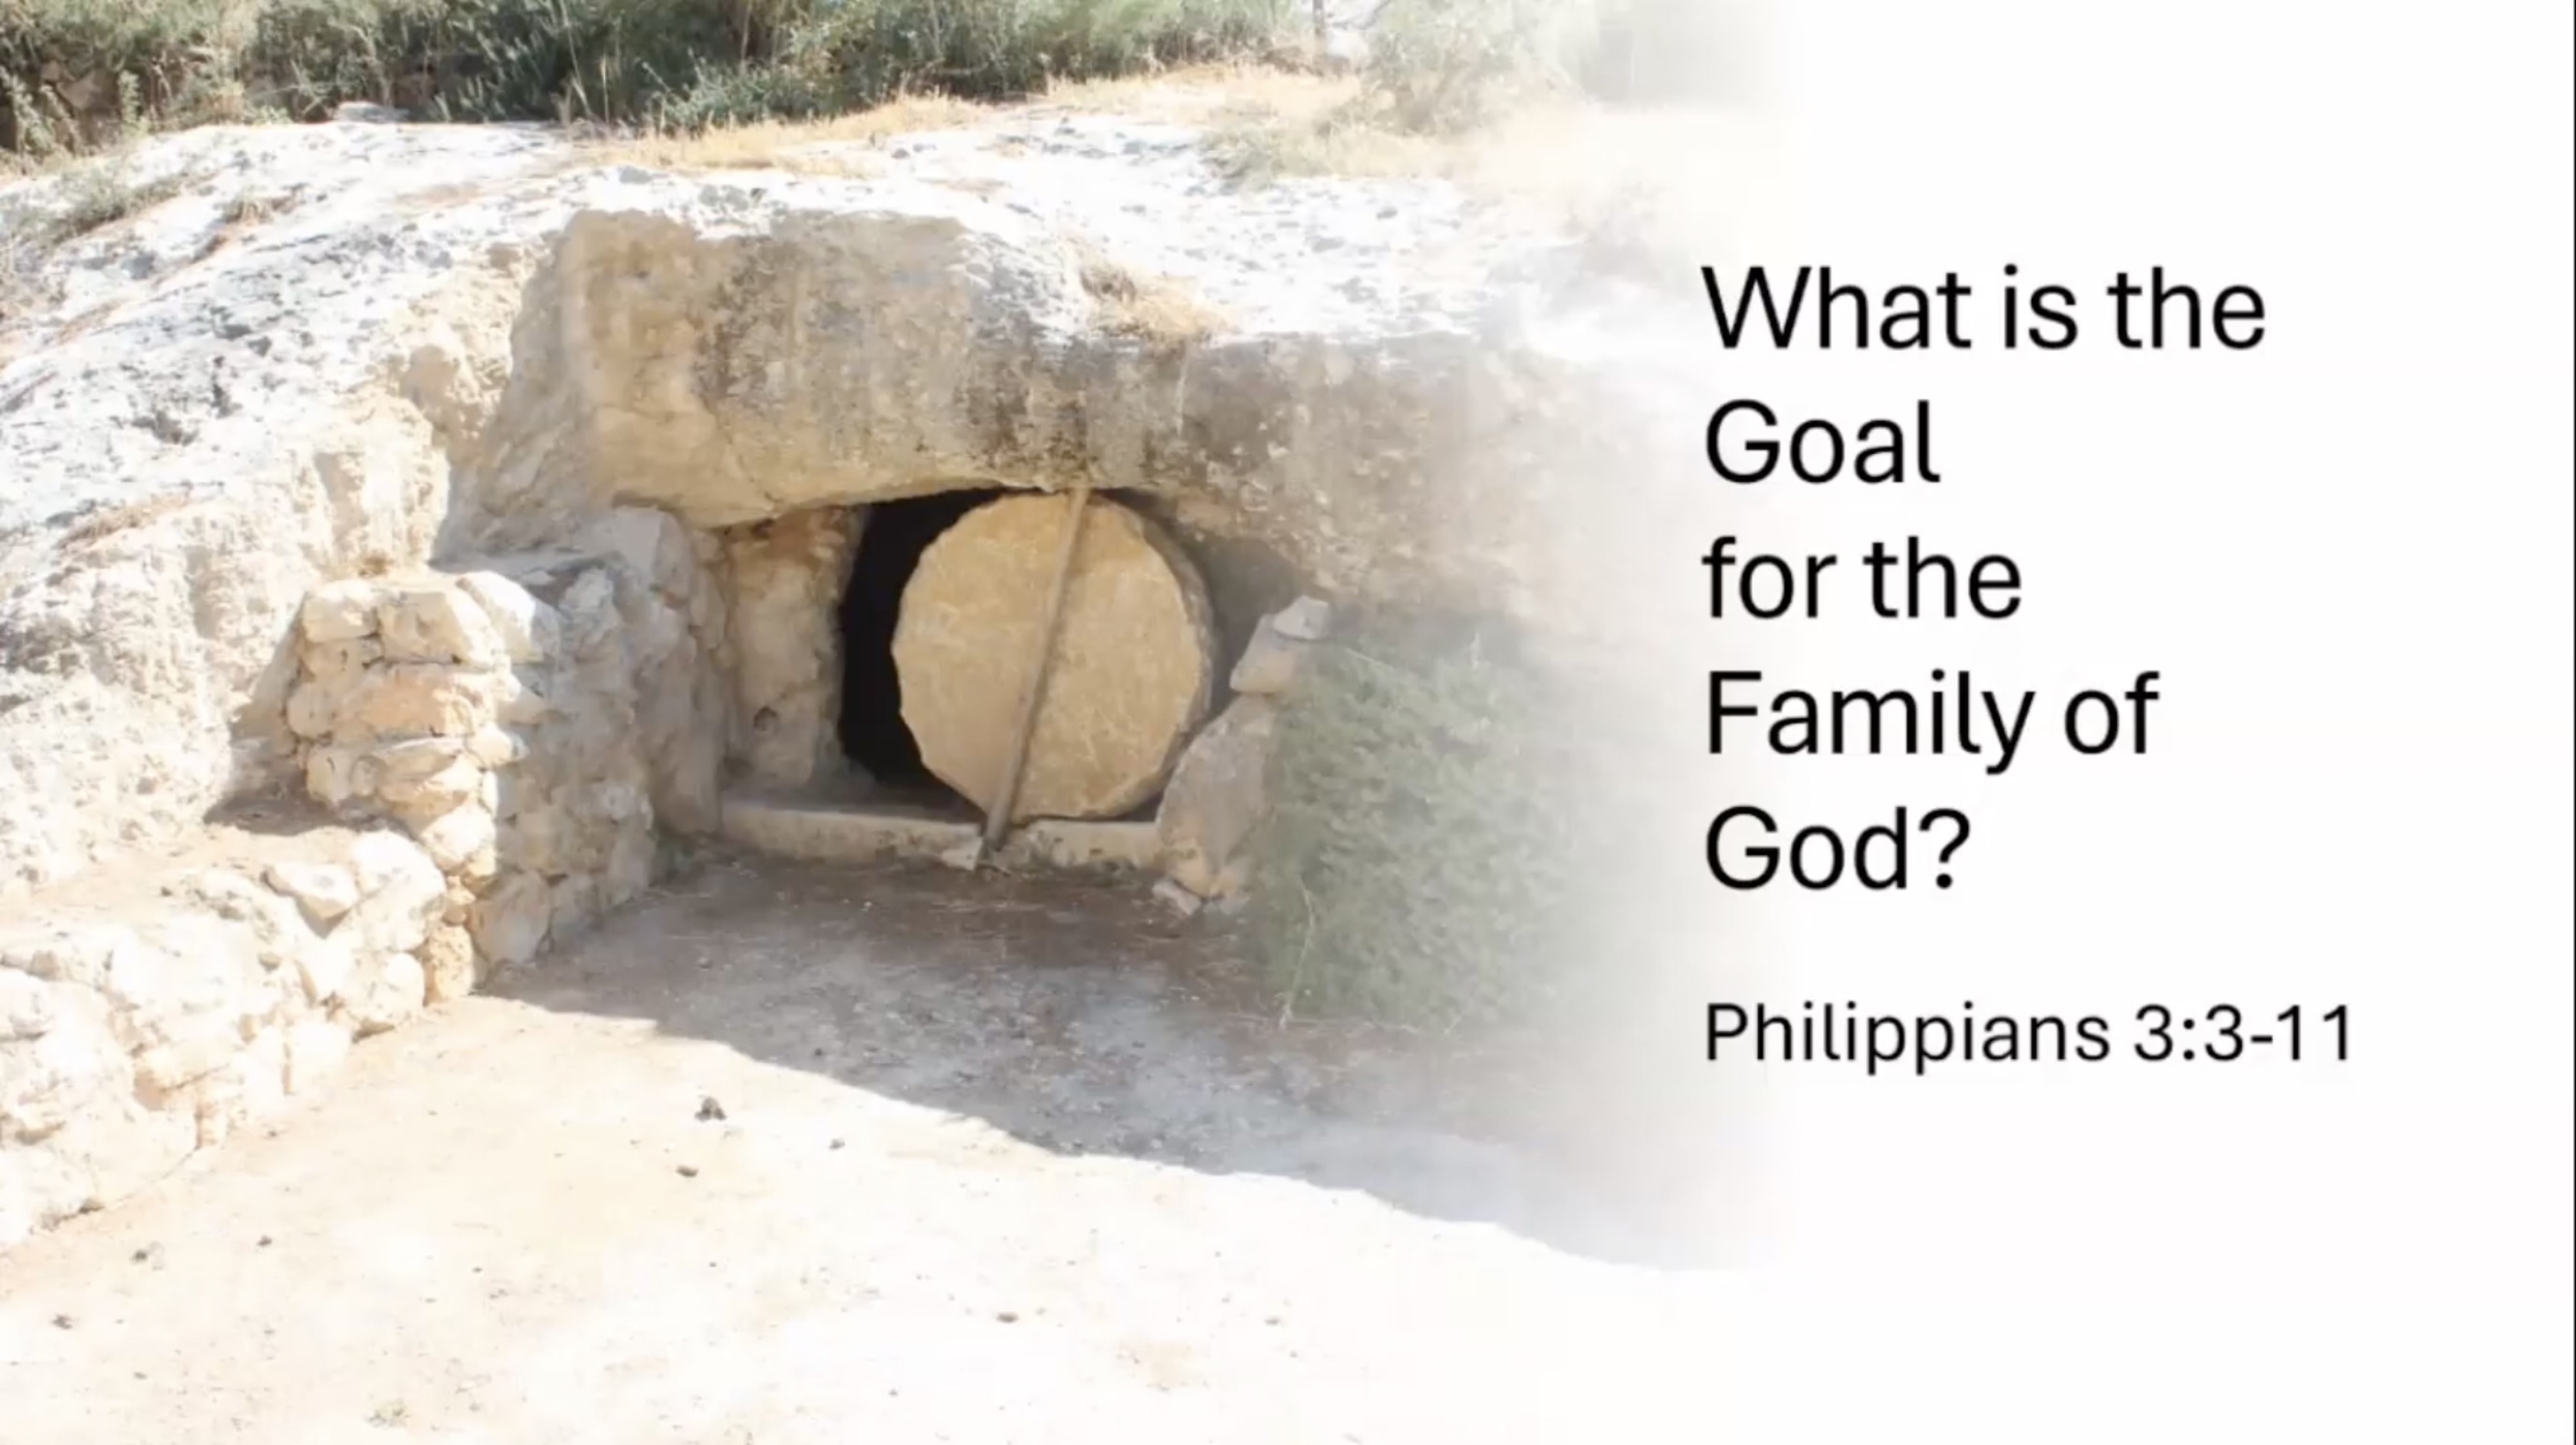 What is the Goal for the Family of God?